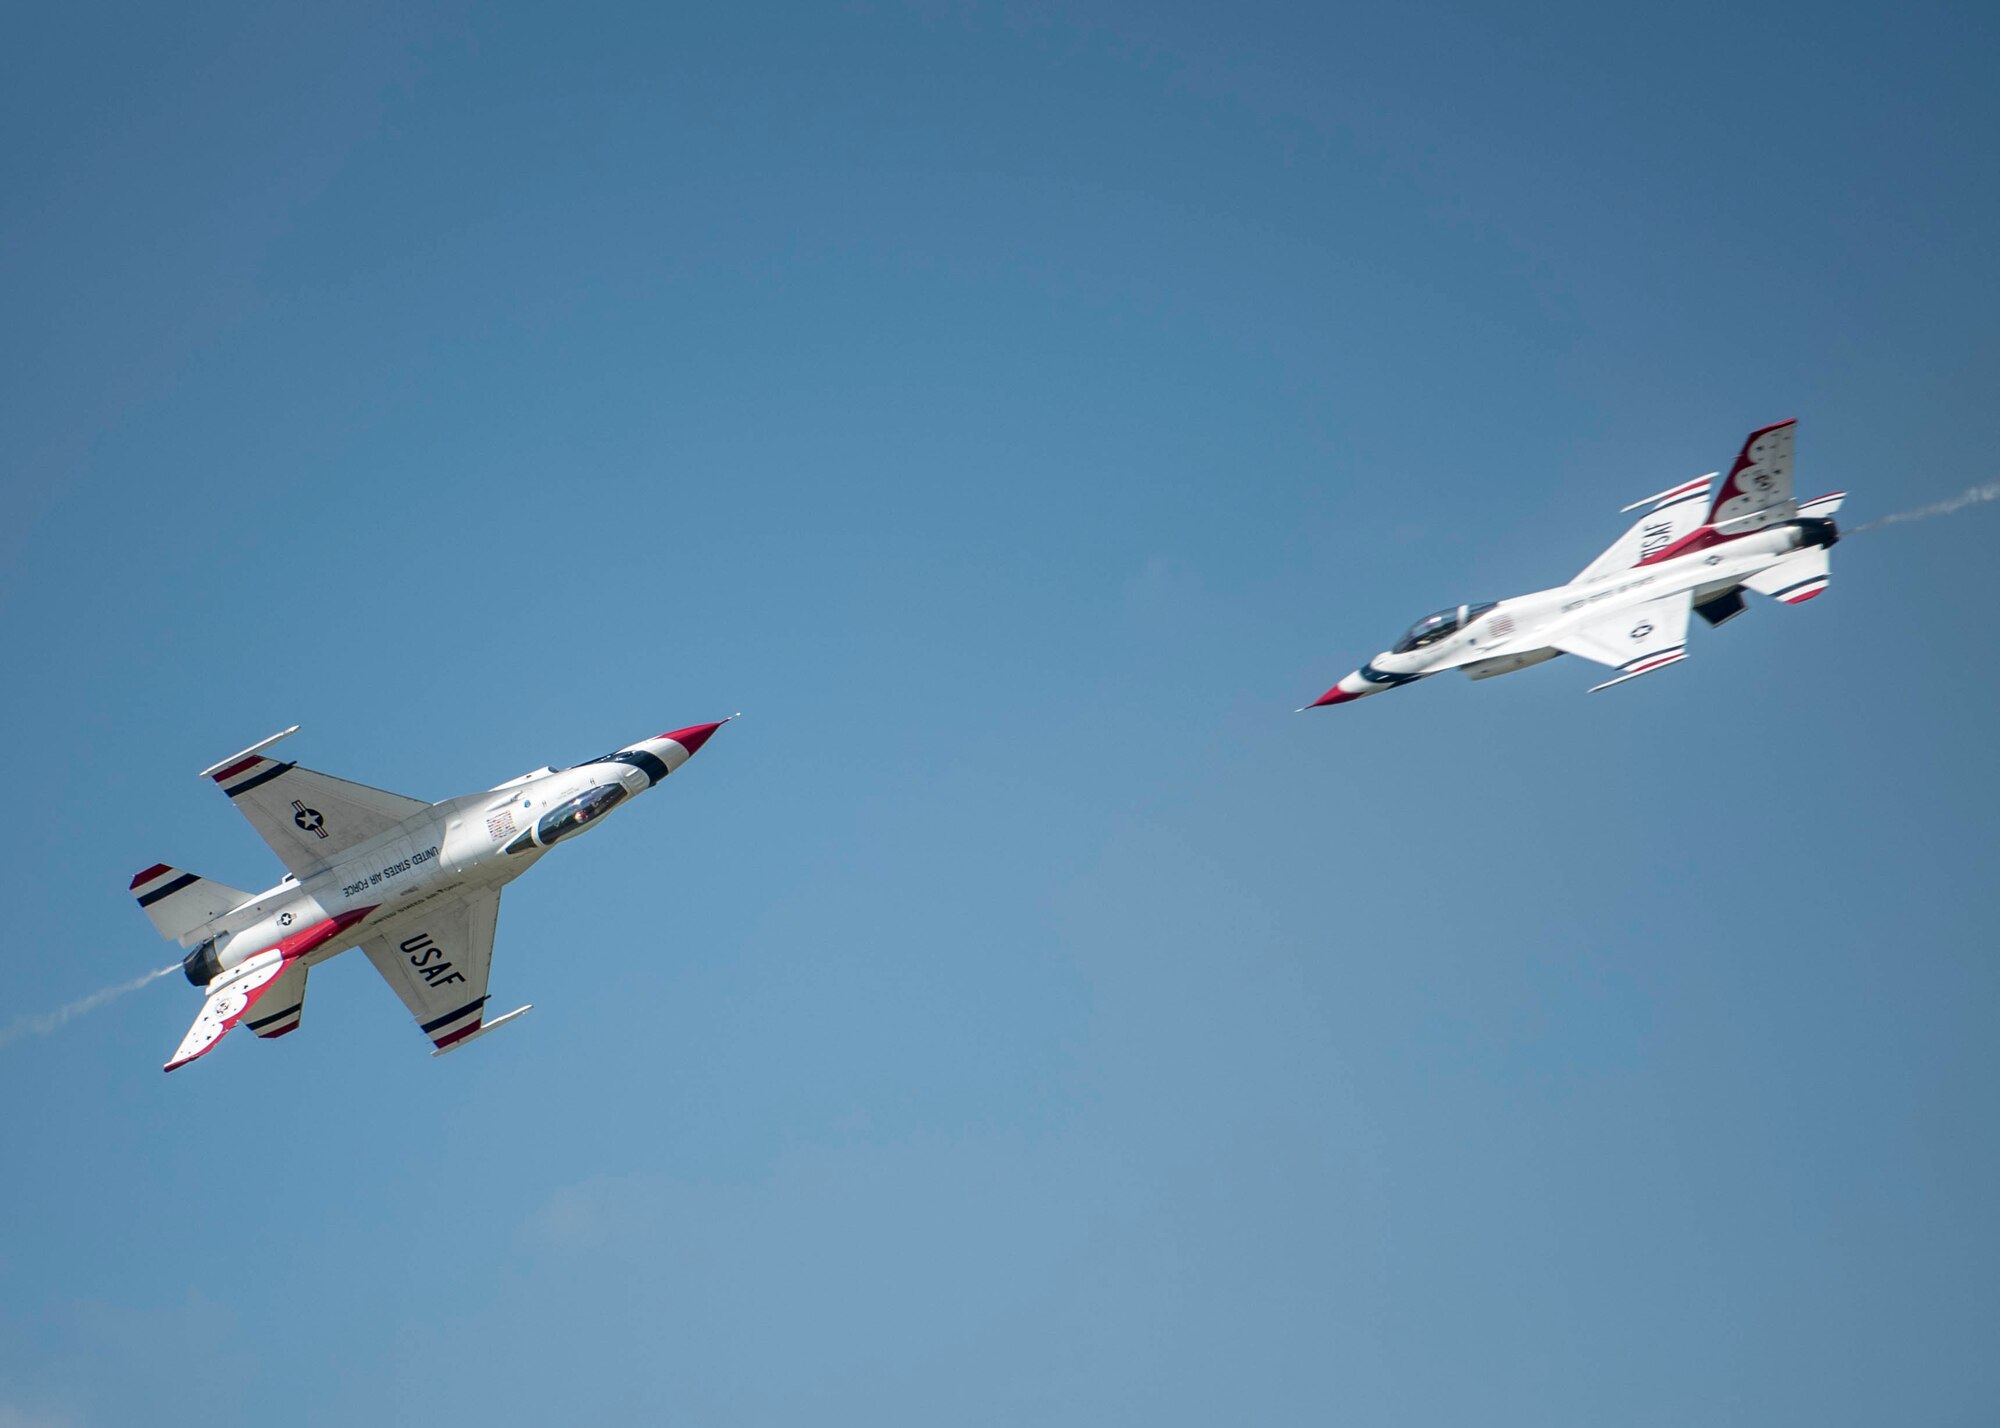 The Thunderbirds, officially known as the U.S. Air Force Air Demonstration Squadron, performs precision aerial maneuvers to demonstrate the capabilities the F-16 Fighter Falcon, the Air Force’s premier multi-role fighter jet, Scott Air Force Base, Ill., June 11, 2017.   Eight highly experienced fighter pilots, four support officers, three civilians, and over 120 enlisted personnel help make it possible for the team to showcase the capabilities of this fighter jet to millions of people each year.  Together, this team has ensured that a demonstration has never been cancelled due to maintenance difficulty. (U.S. Air Force photo by Staff Sgt. Jodi Marttinez)